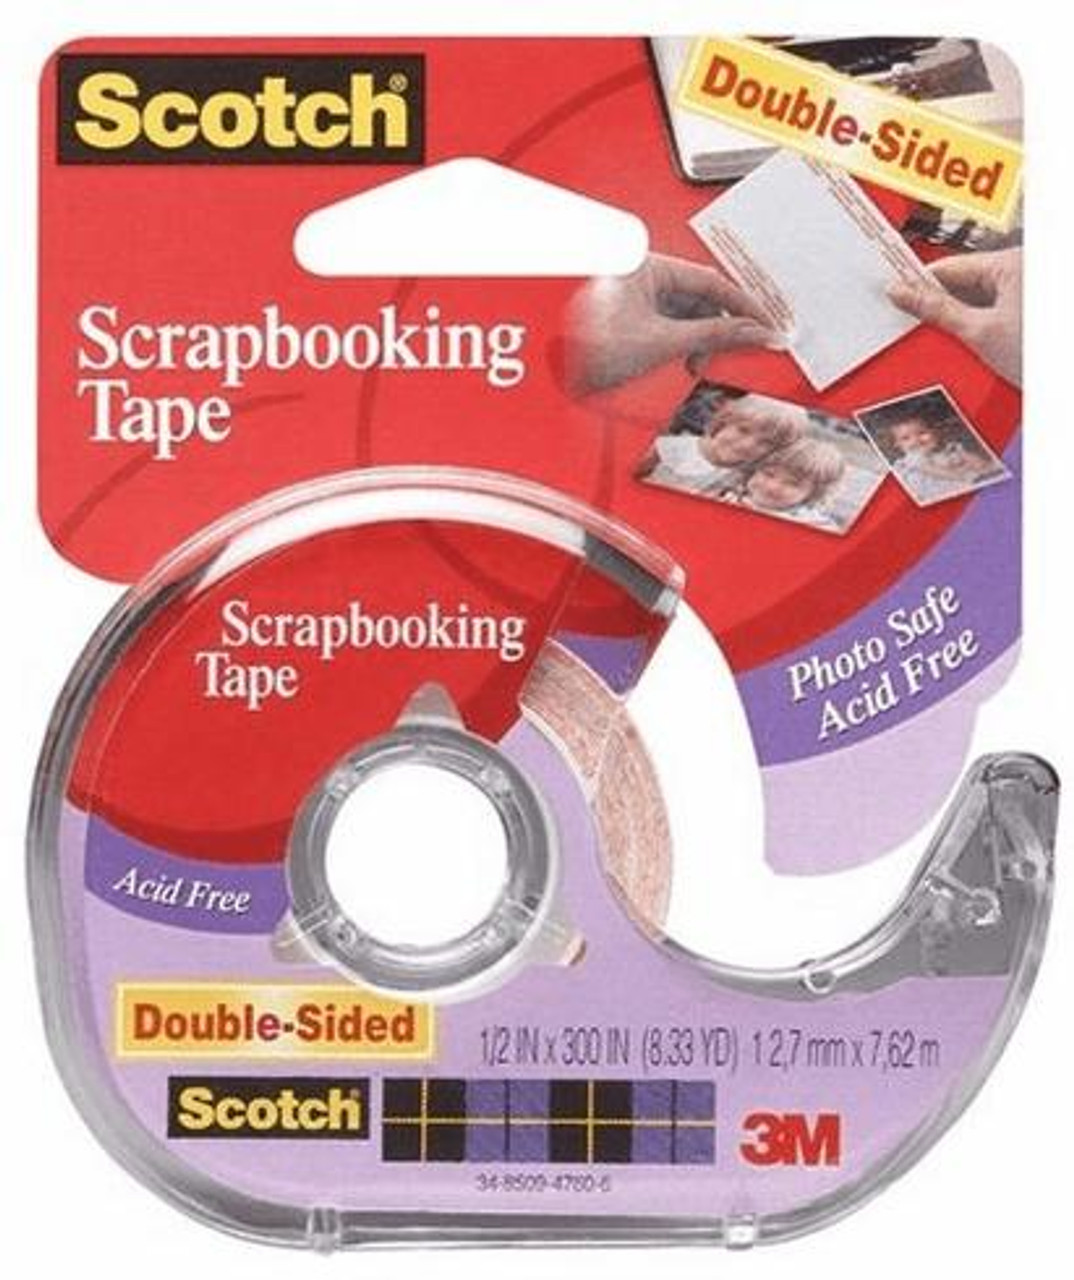 3M - #002 Scotch Photo & Document Double-Sided Mounting Tape - Sam